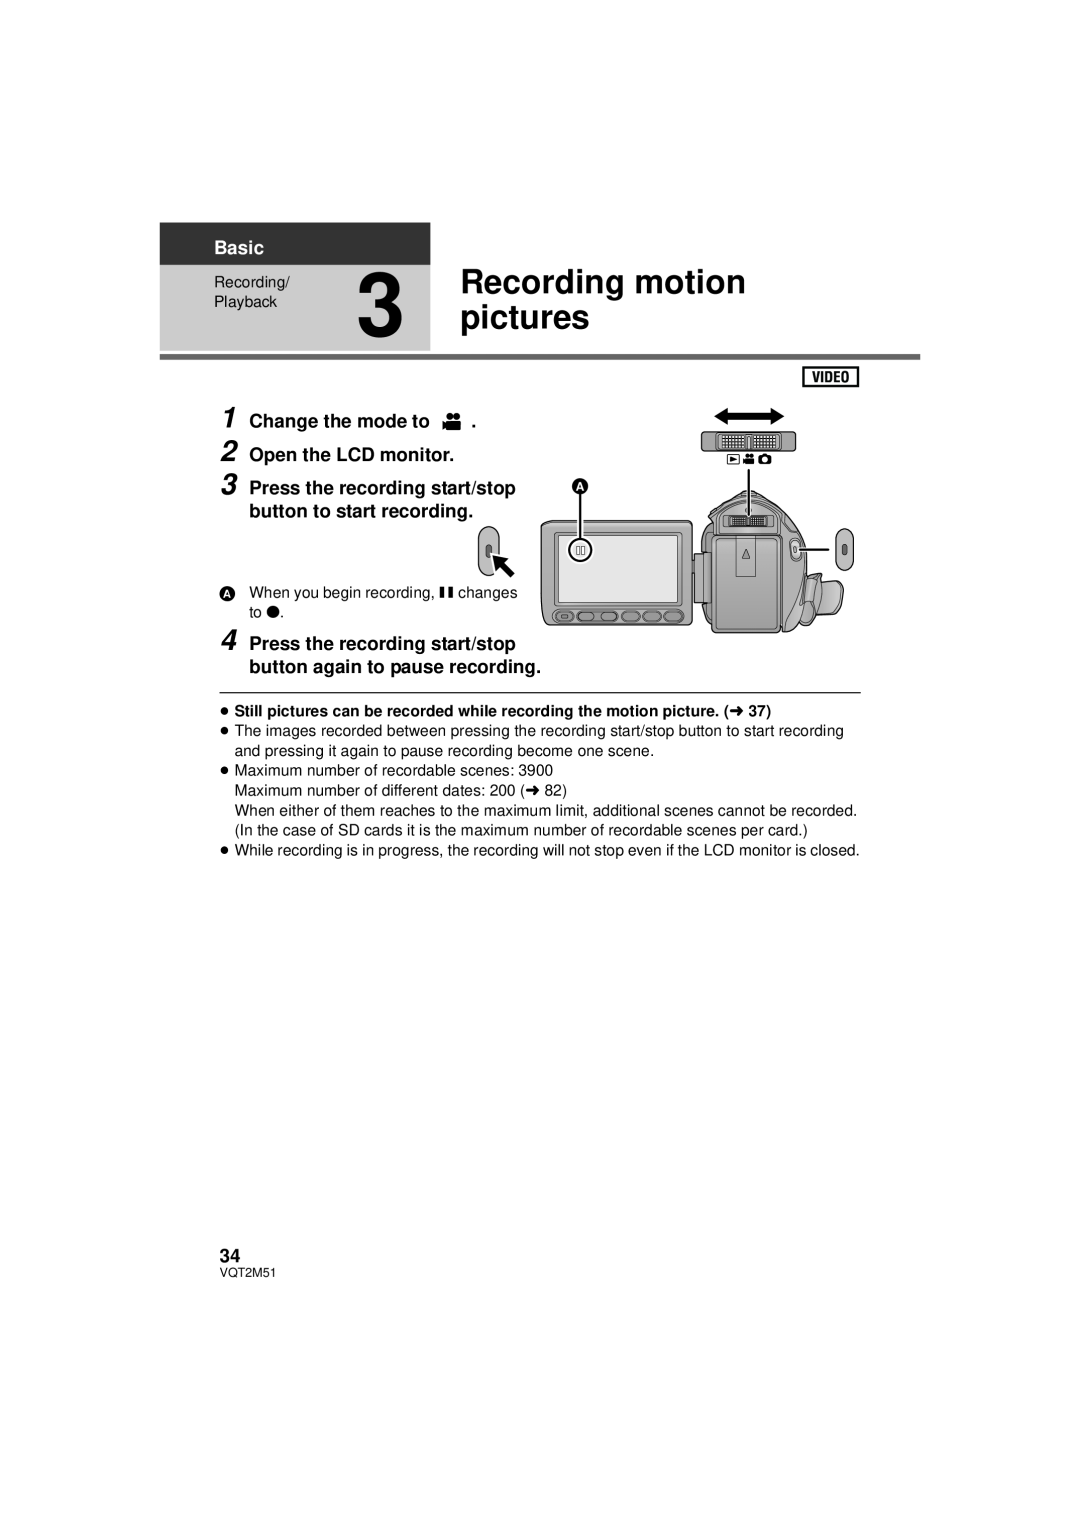 Panasonic HDC-TM55P/PC, HDC-SD60P/PC Recording motion, pictures, Change the mode to 2 Open the LCD monitor, Basic 